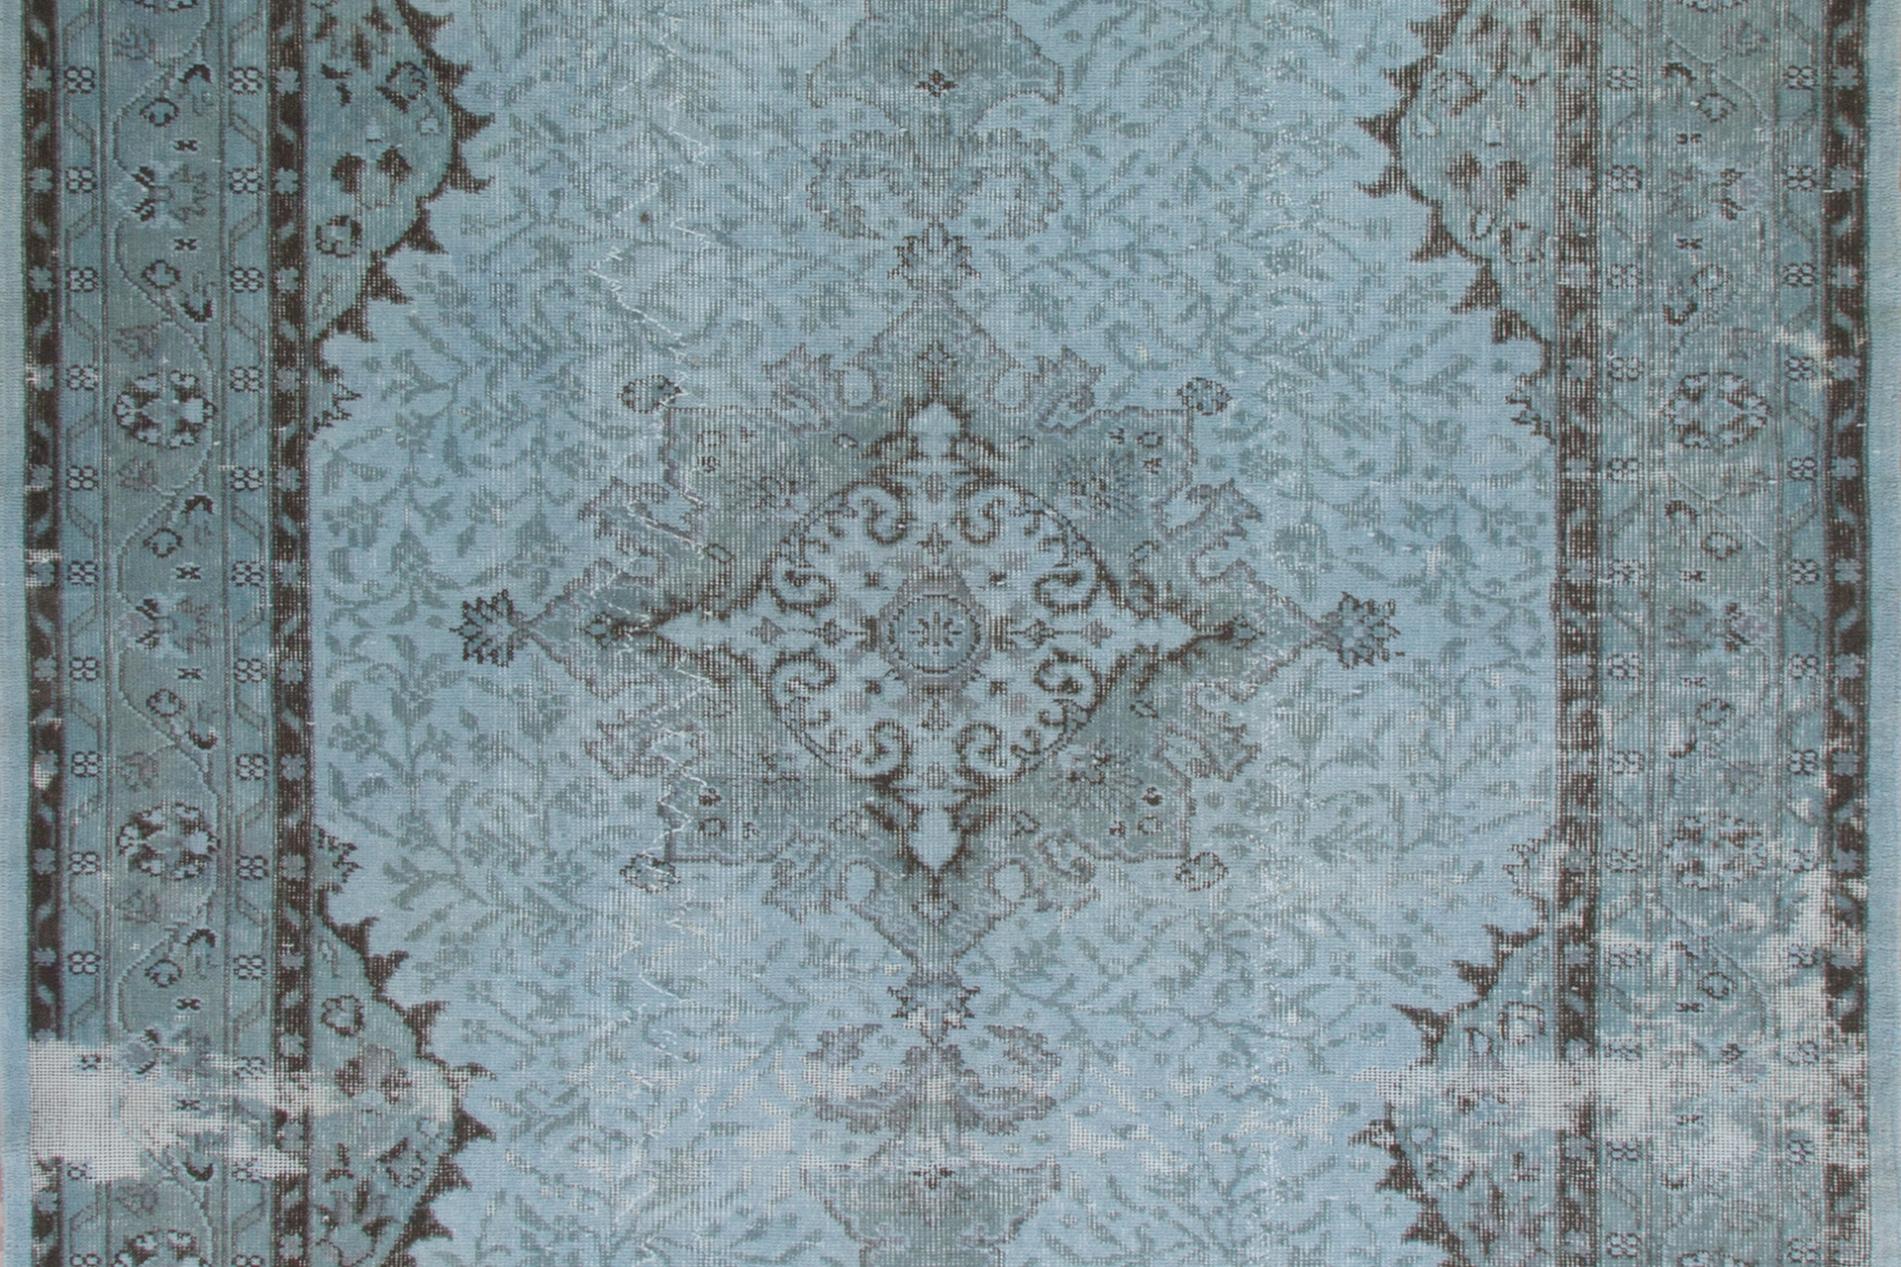 Turkish 5.7x9.3 Ft Hand-Knotted Vintage and Modern Area Rug Overdyed in Light Blue Color